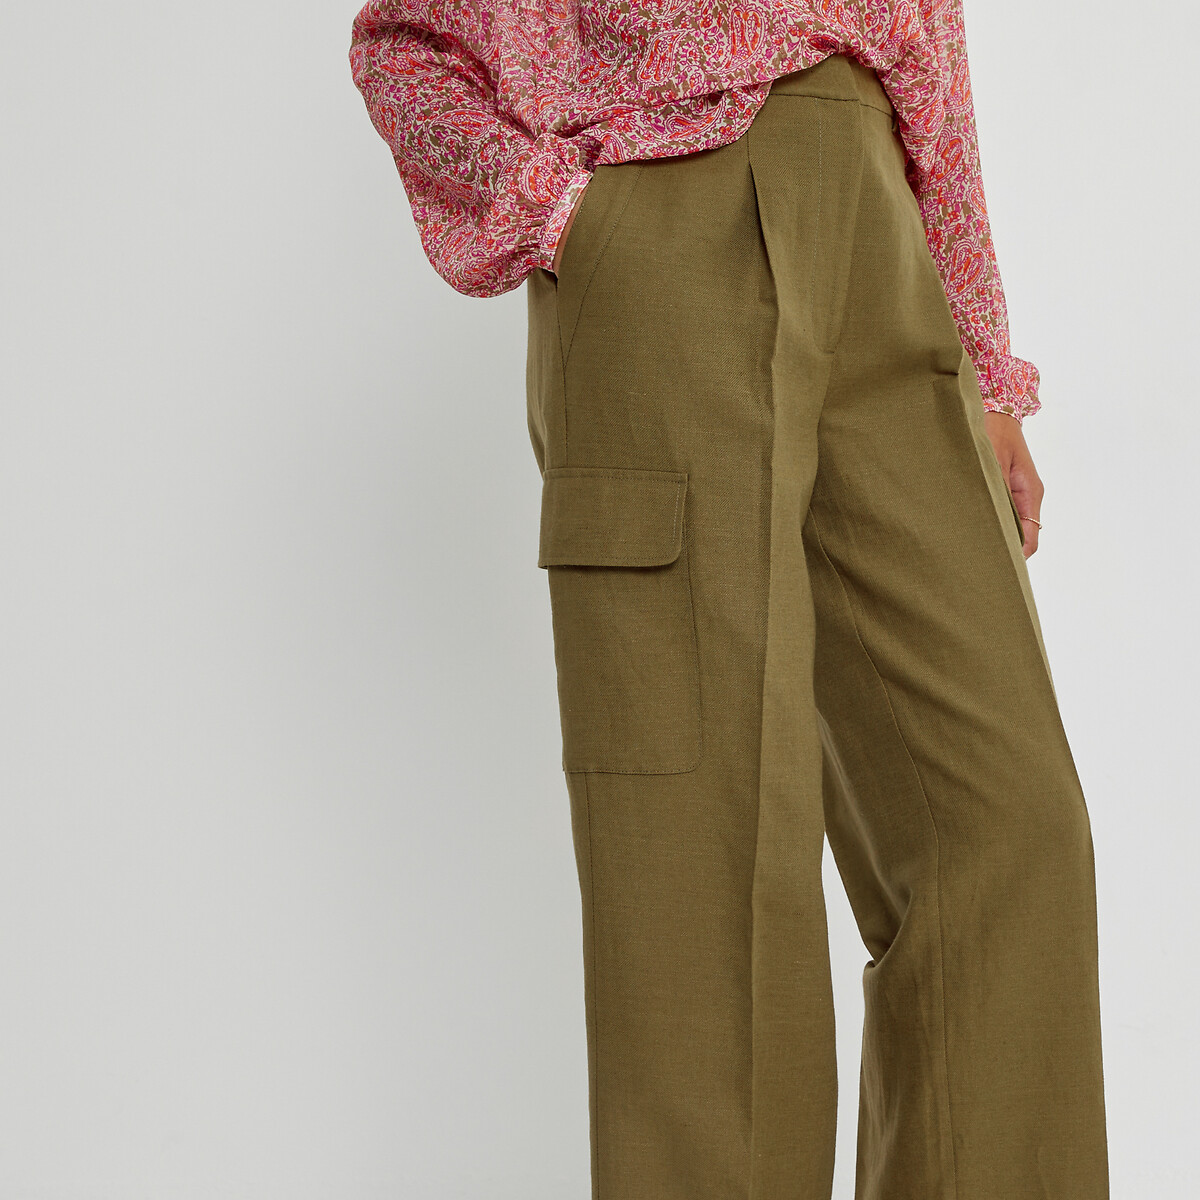 Wide Leg Trousers in Cotton/Linen with Utility Pockets, Length 30"